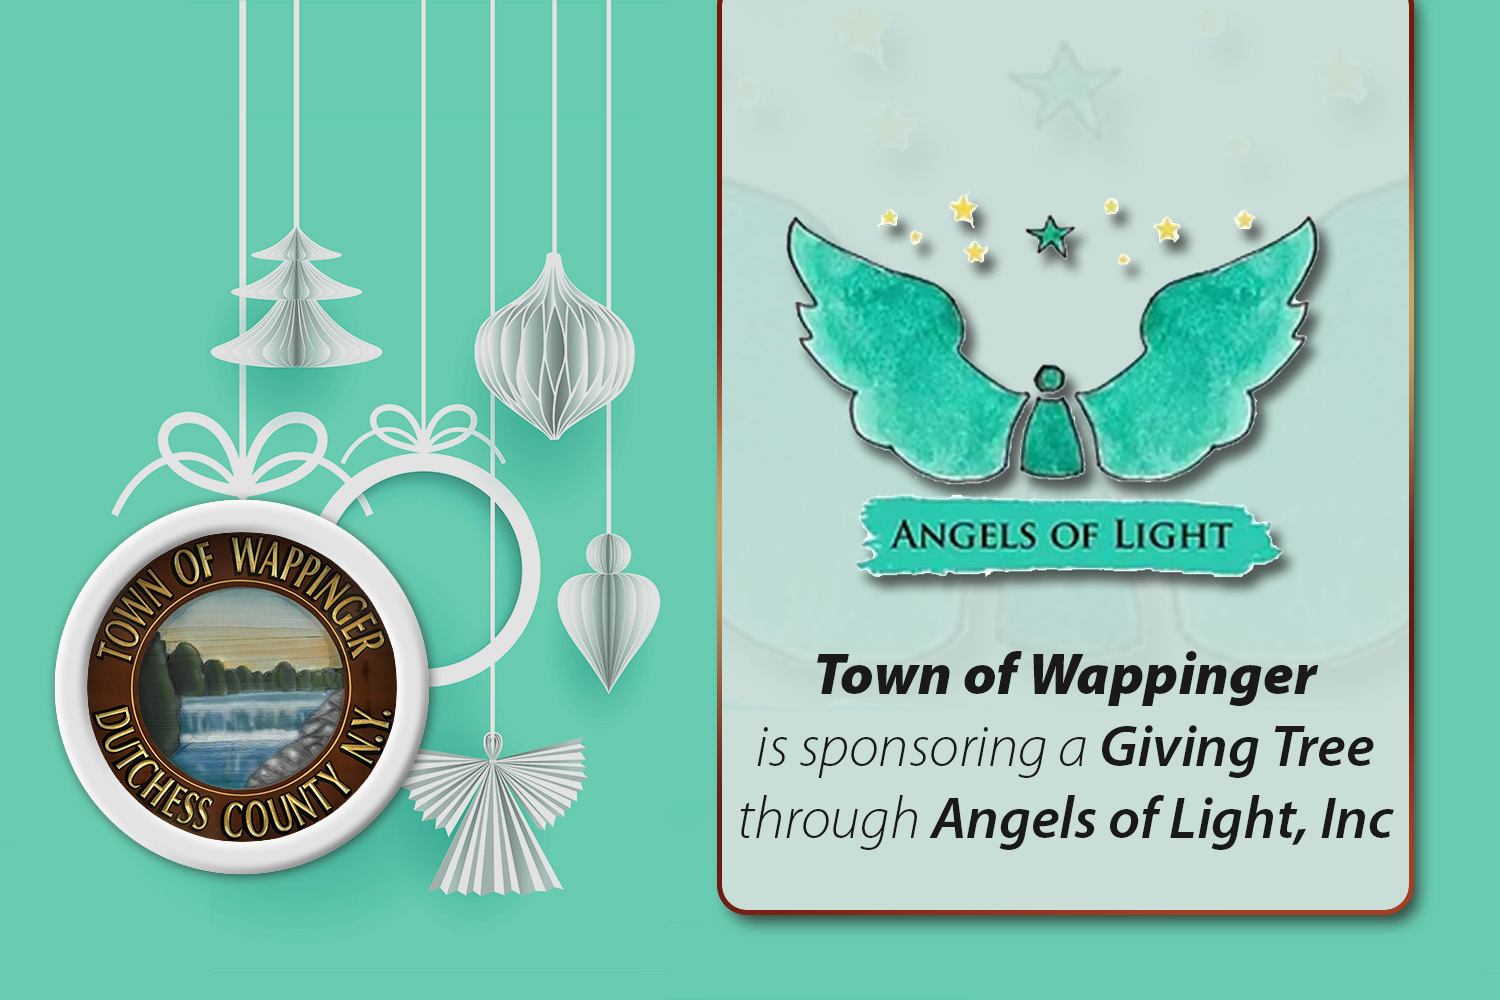 Wappinger Town Sponsors Giving Tree Through Angels of Light, Inc.